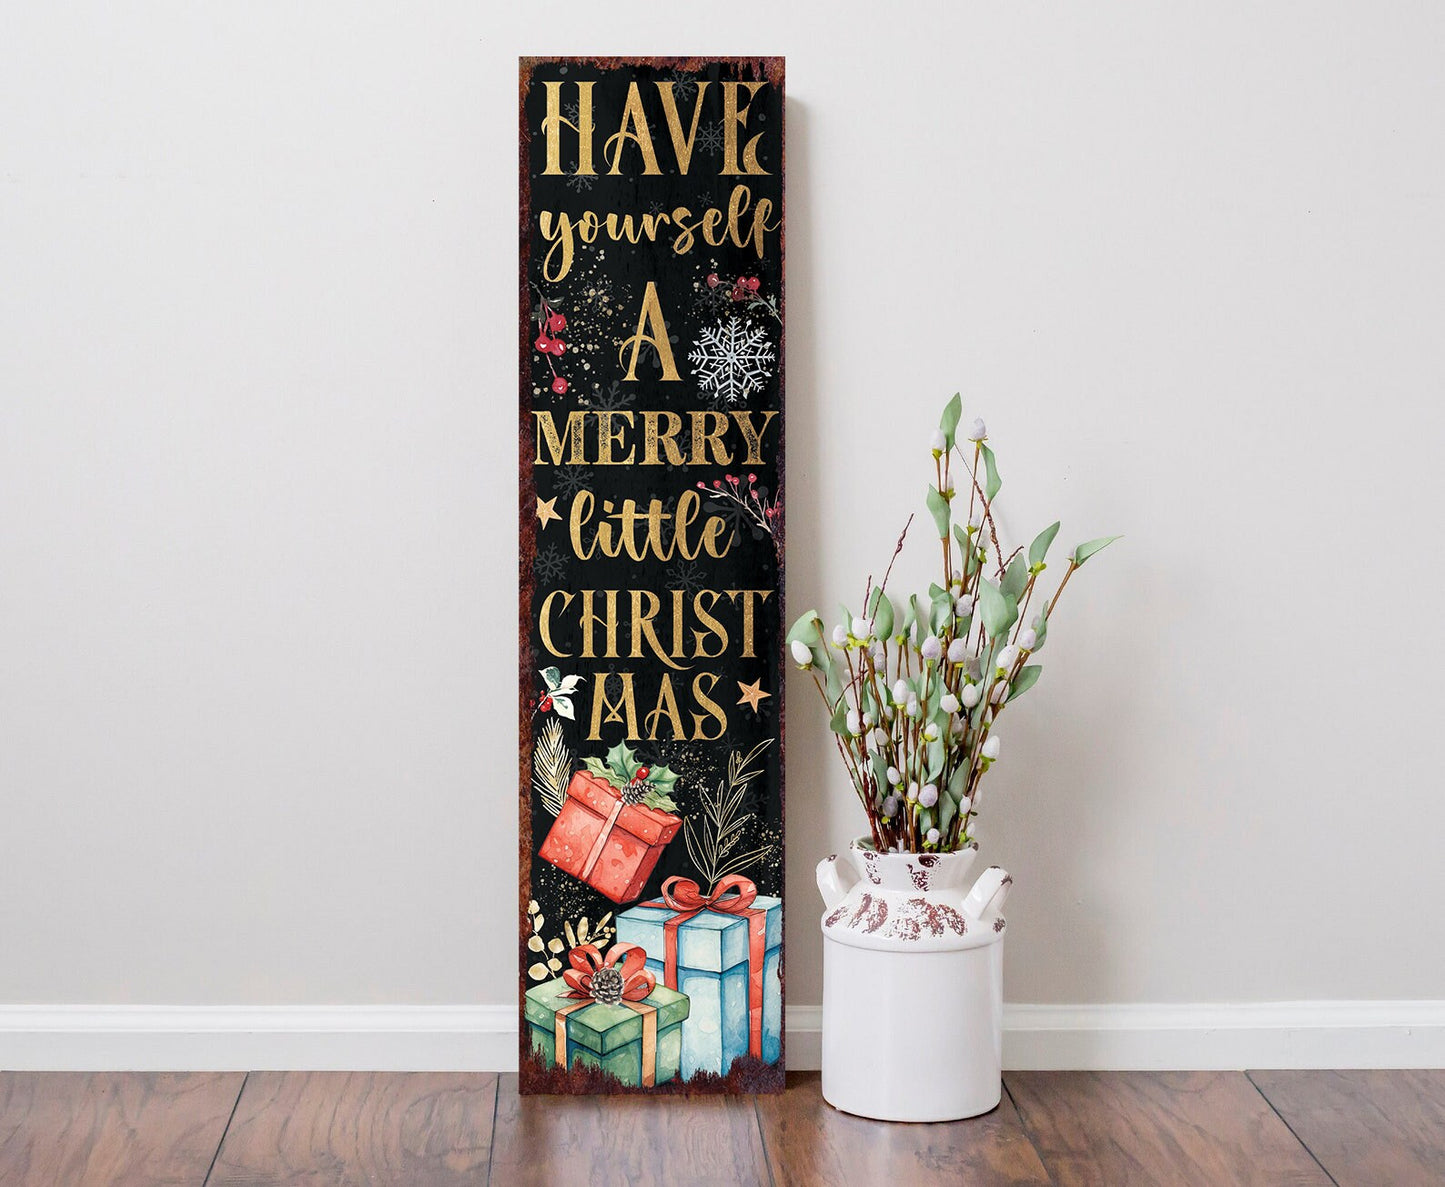 36in "Have Yourself a Merry Little Christmas" Porch Sign - Front Porch Christmas Decor Welcome Sign, Rustic Modern Farmhouse Entryway Board